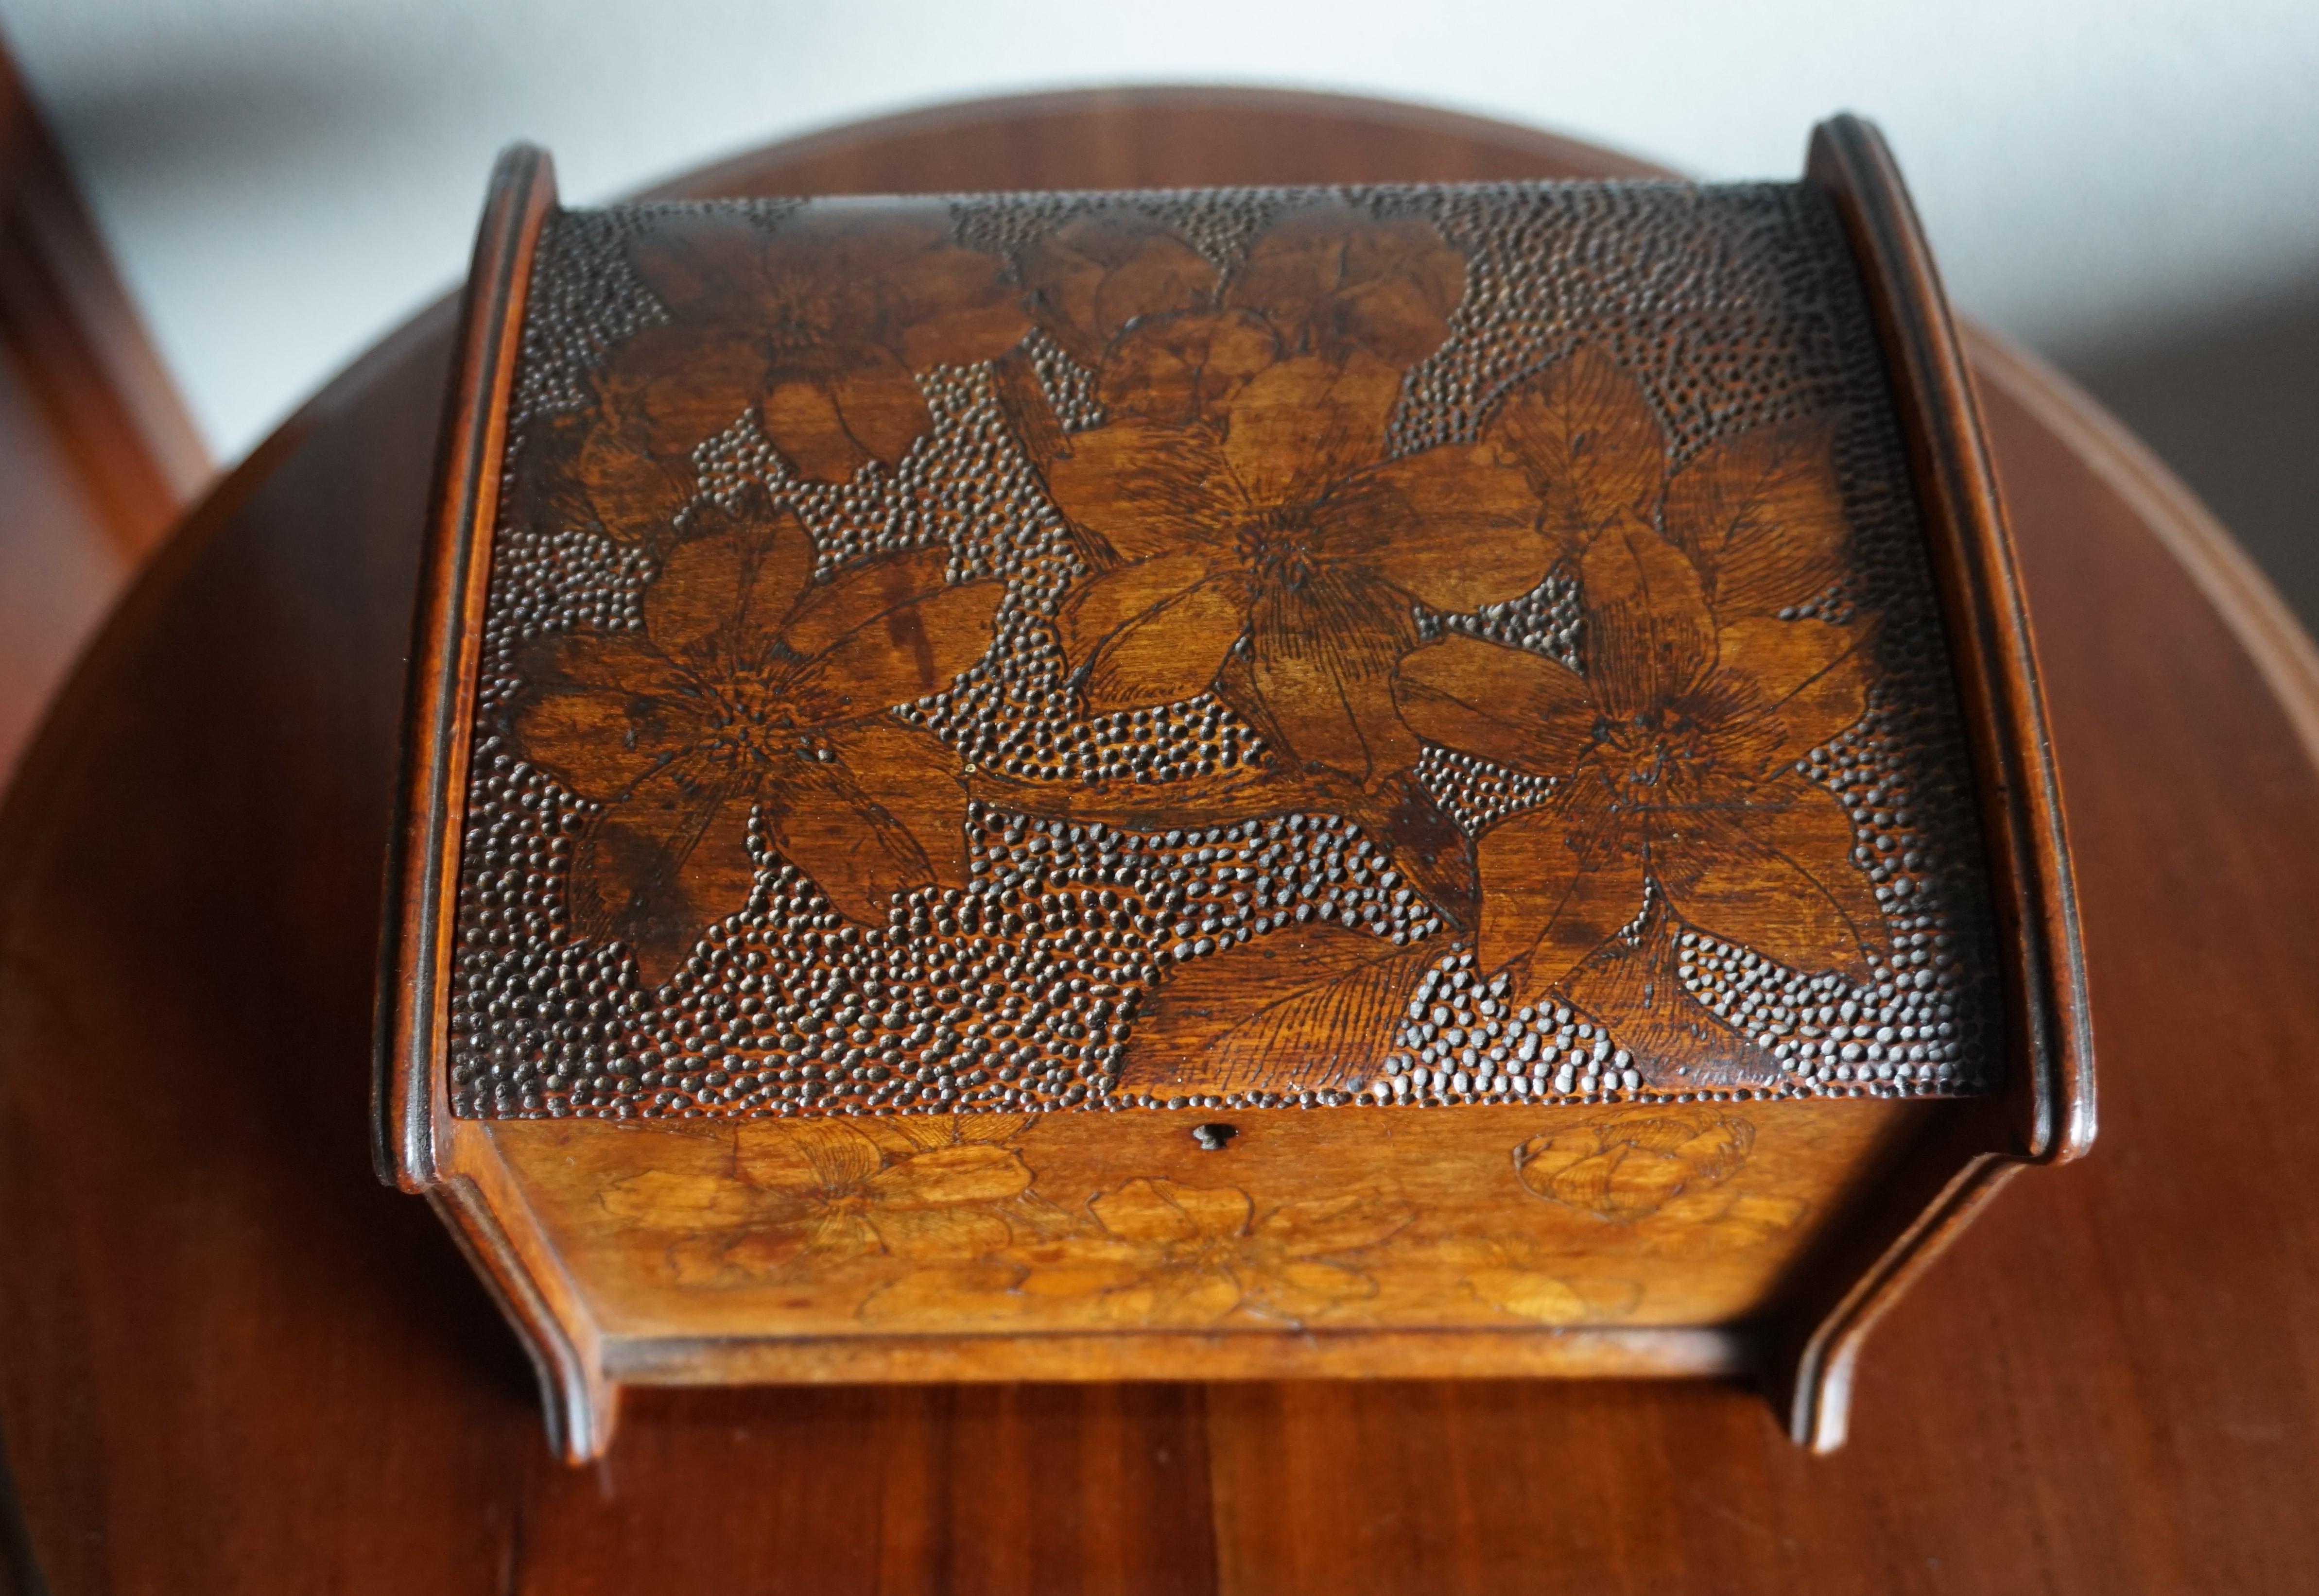 One of a kind Arts & Crafts box with an incredibly rich patina.

If you have an eye for decorative and artistically fine antiques then this Arts & Crafts box could be yours to own and enjoy soon. The overall design/shape of this handcrafted antique